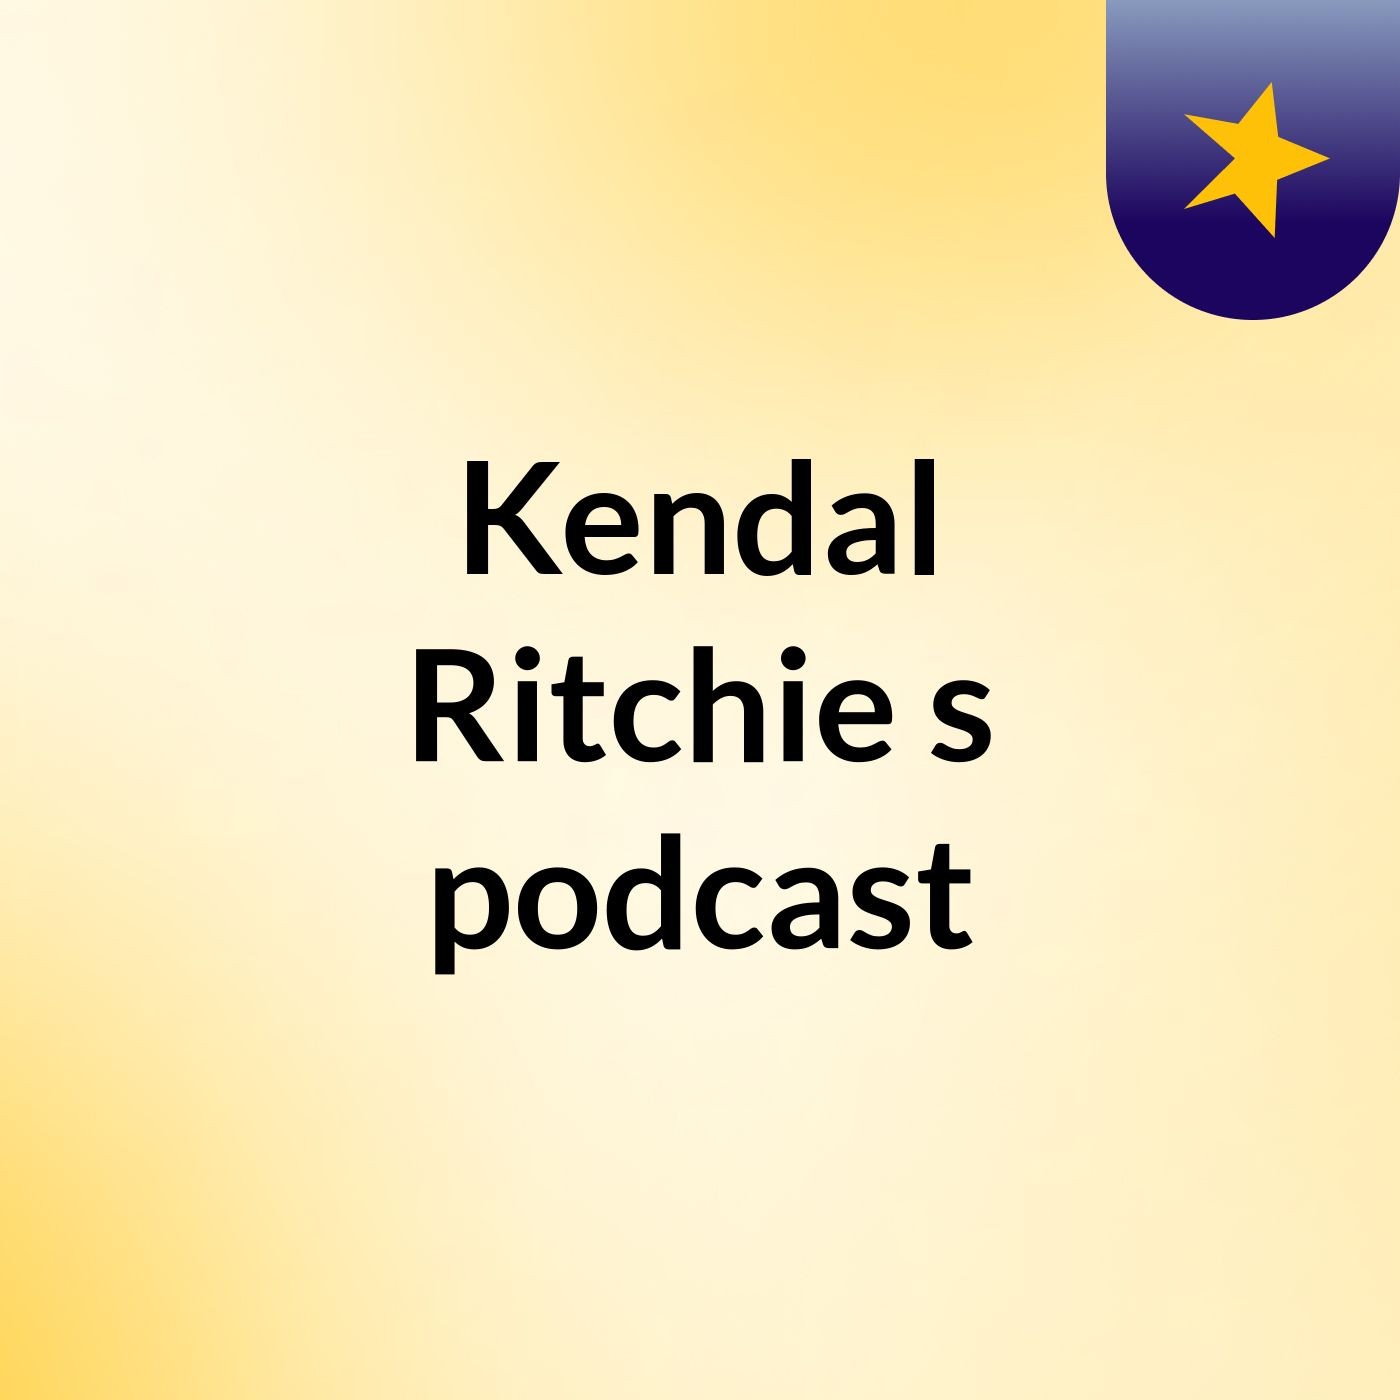 Kendal Ritchie's podcast